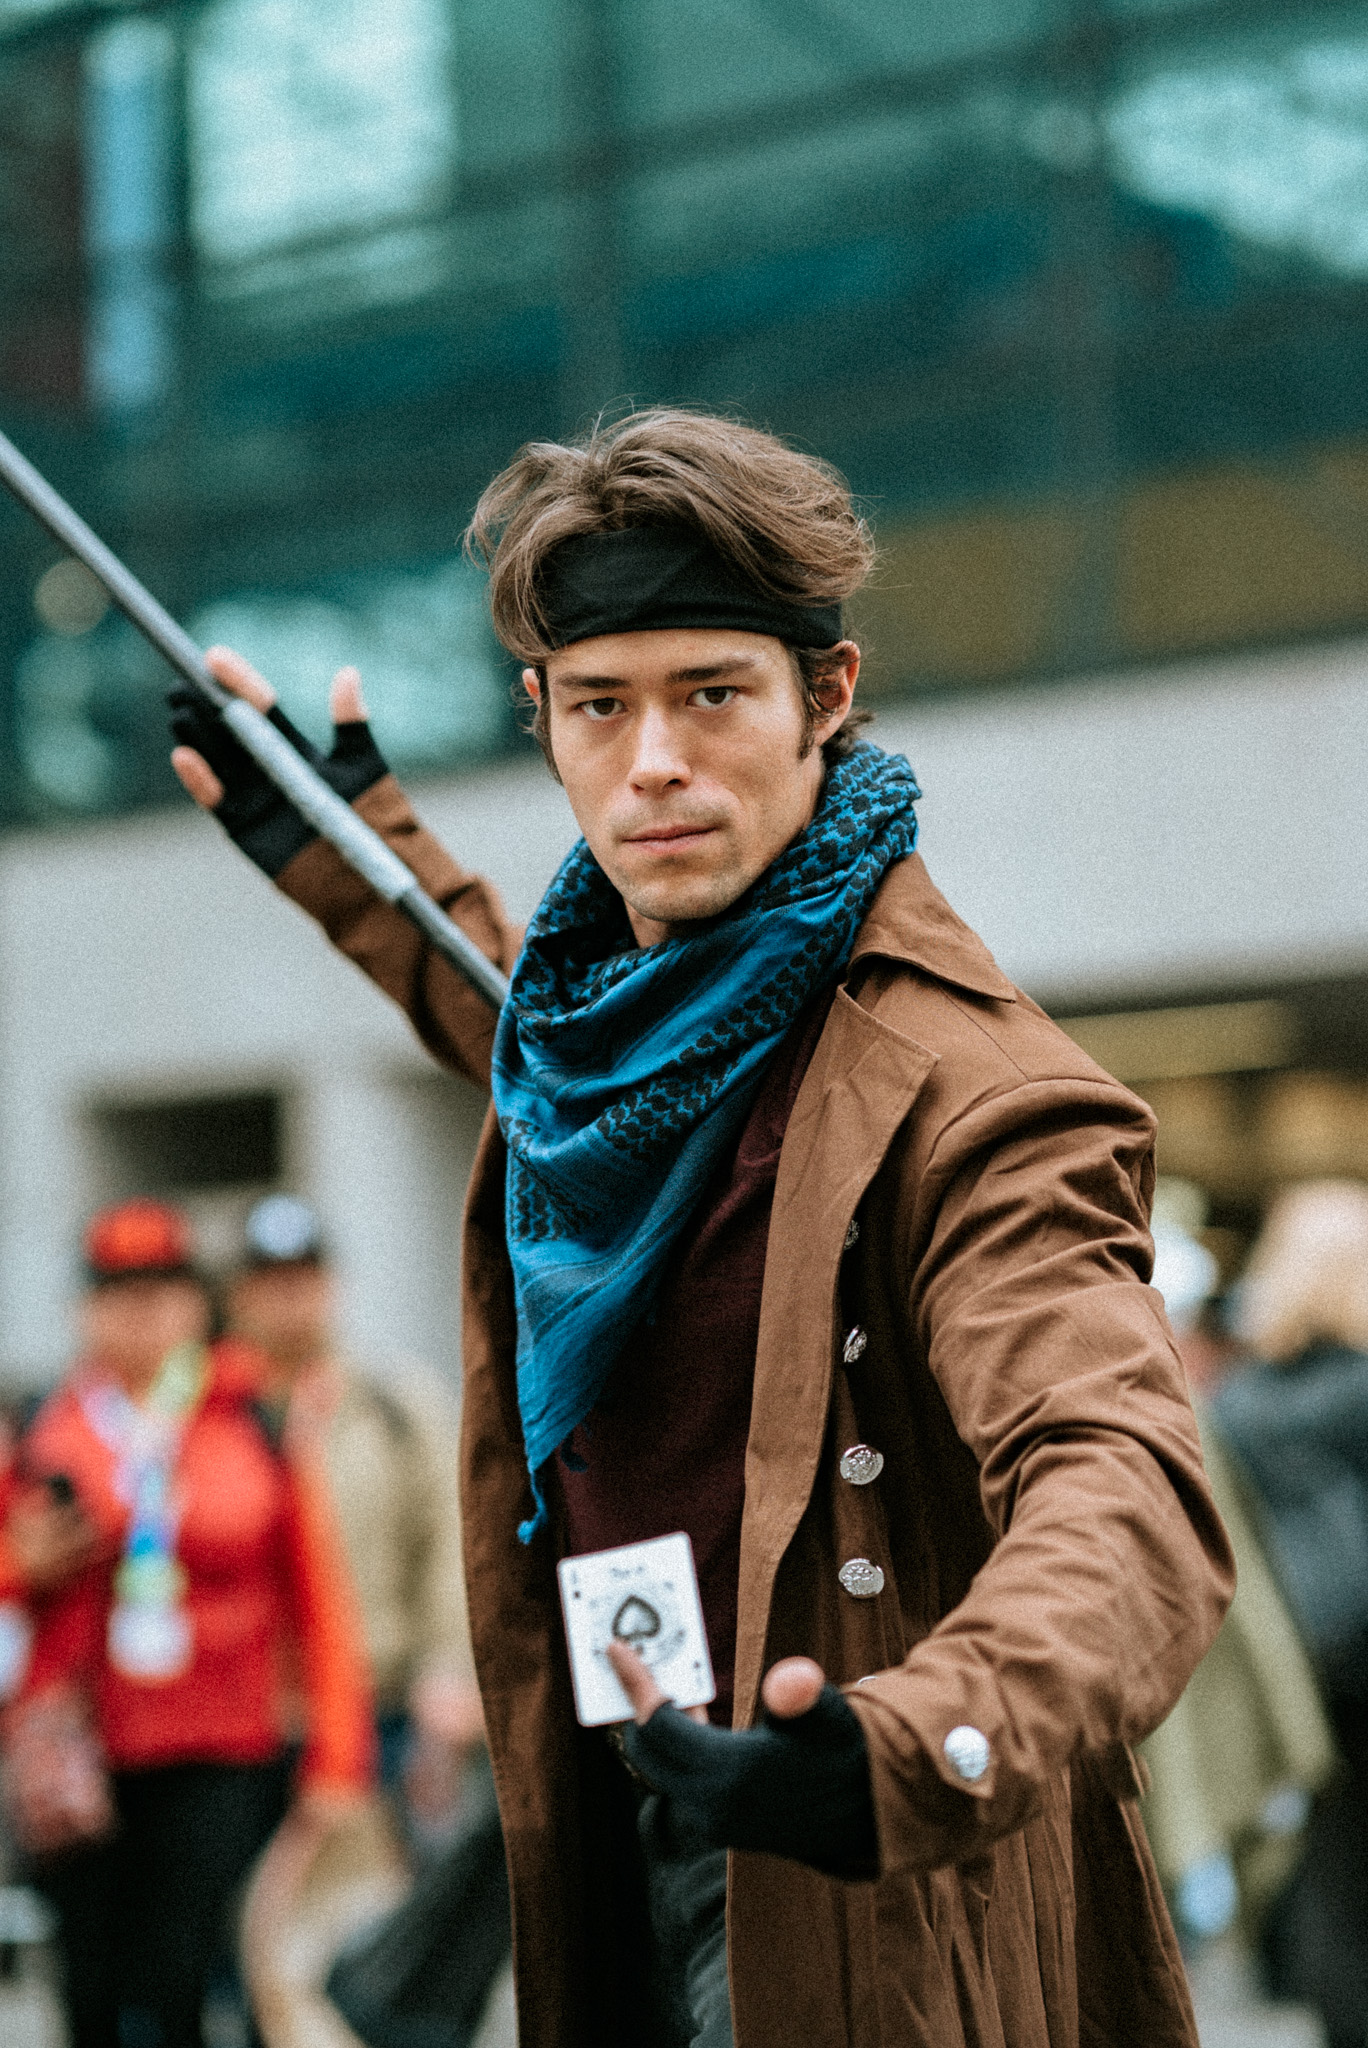 All The Best Cosplays From New York Comic-Con 2019